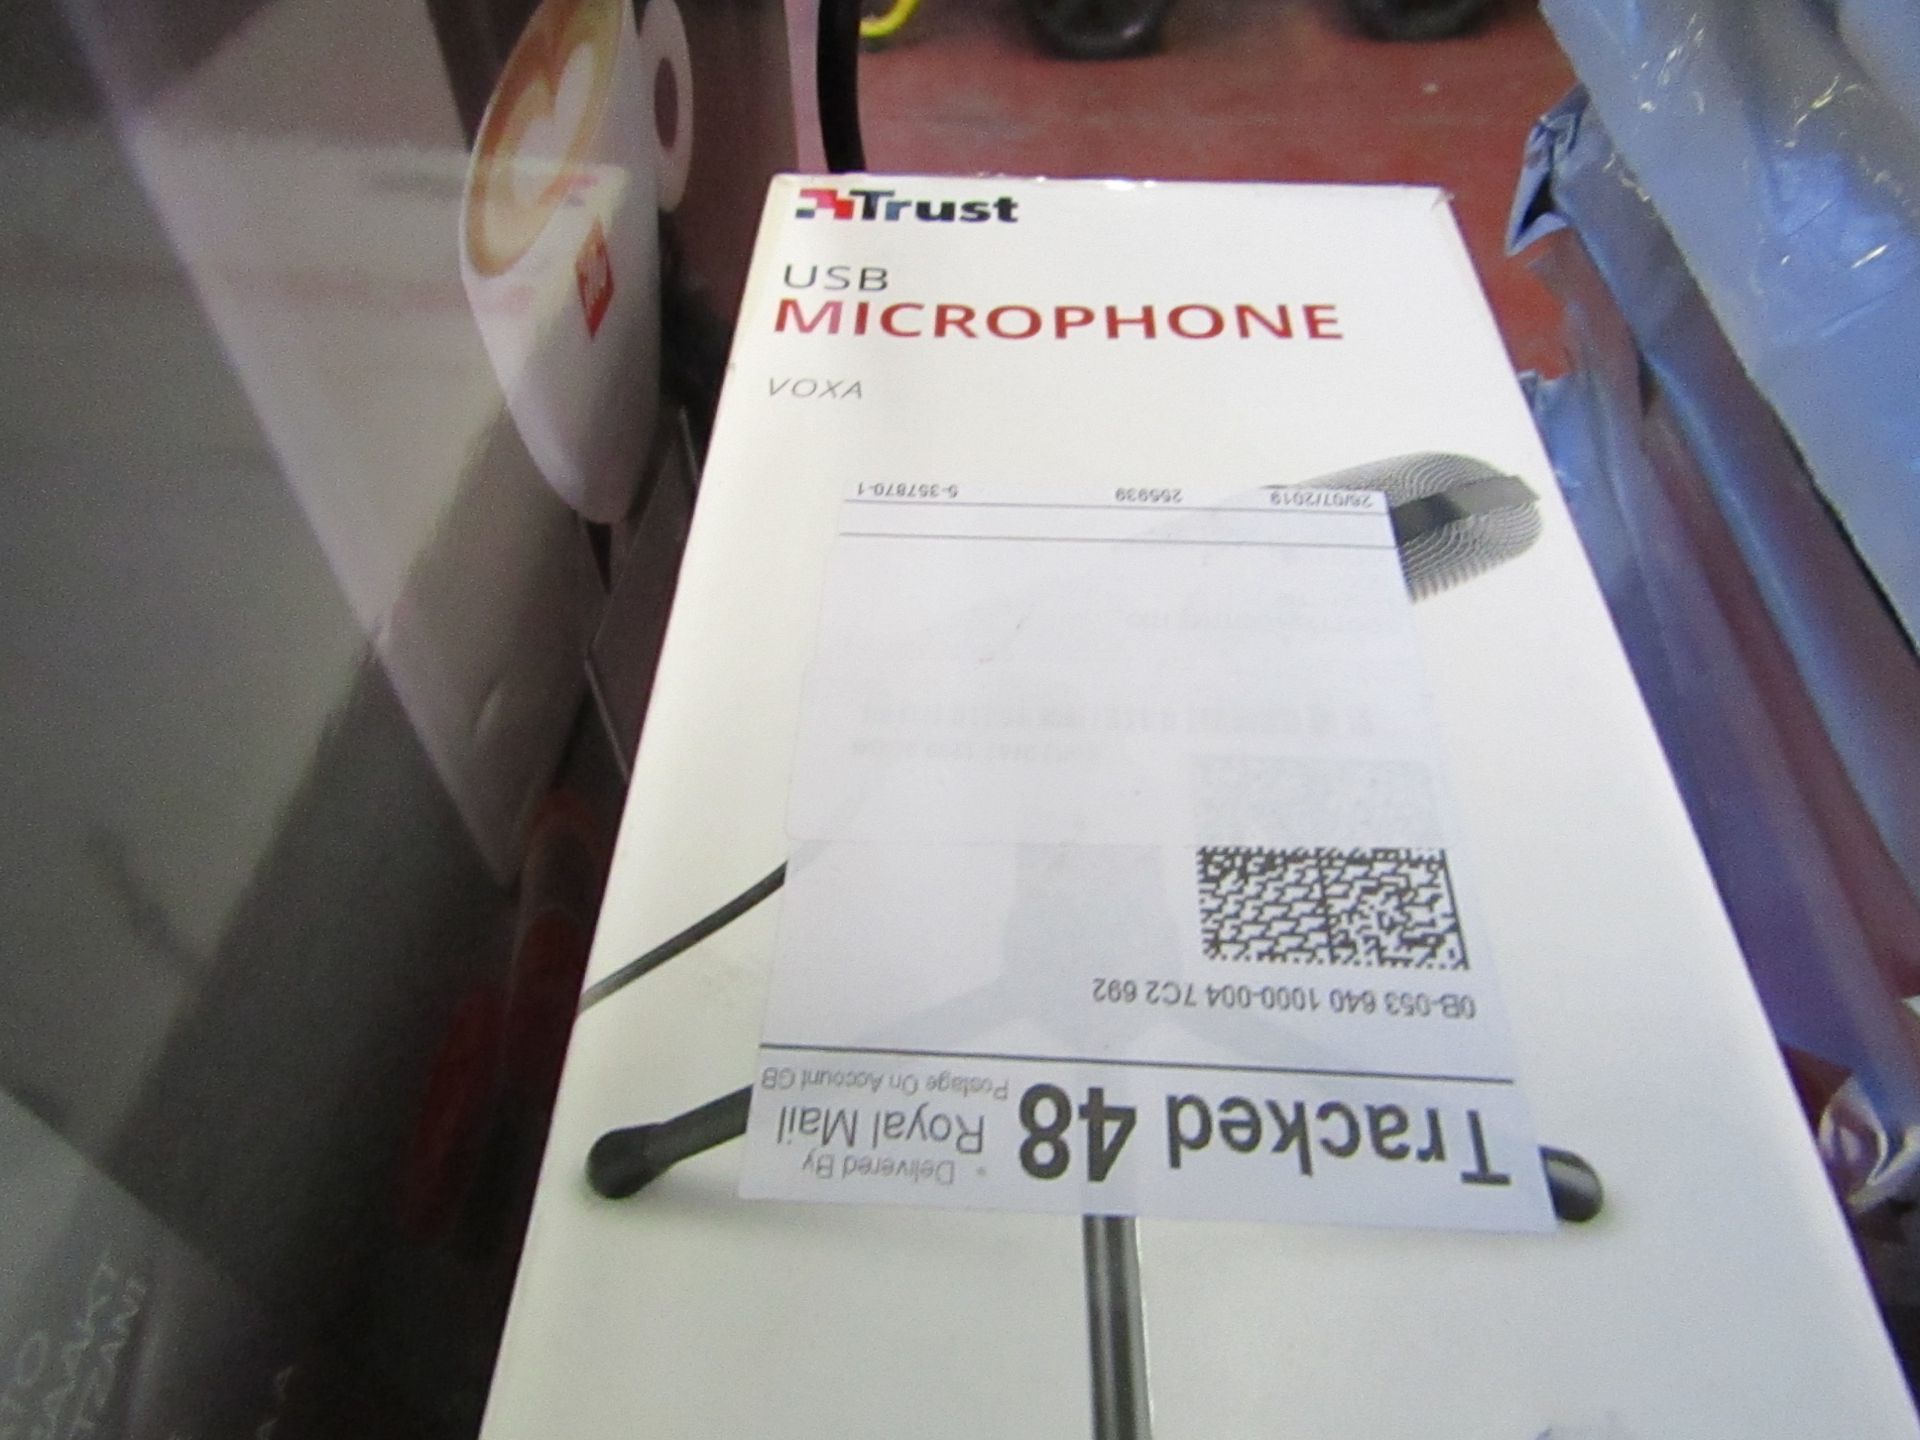 Trust USB microphone, untested and boxed.